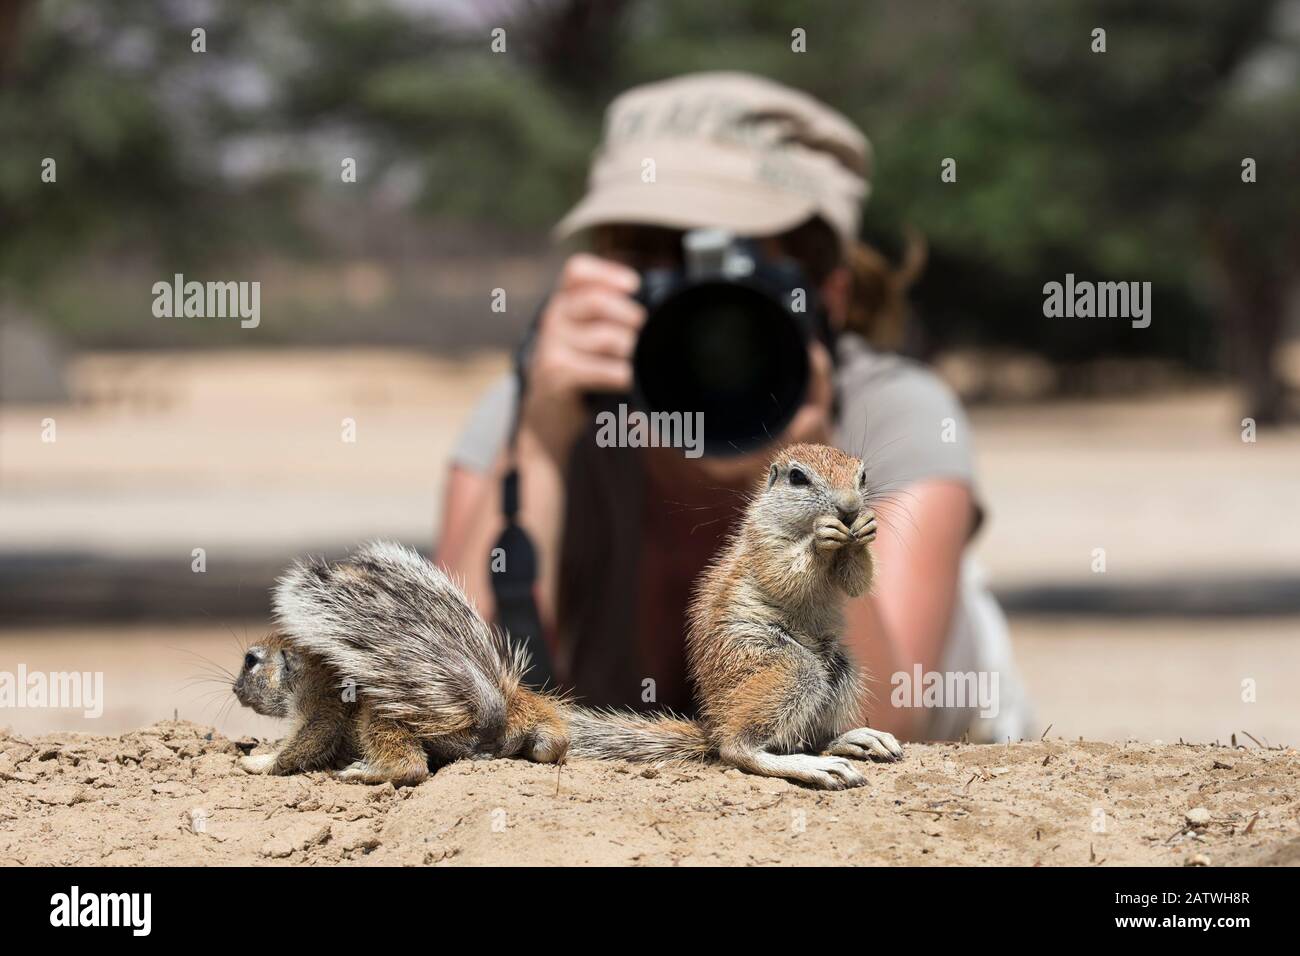 Photographer Ann Toon photographing Cape ground squirrels (Xerus inauris) Kgalagadi Transfrontier Park, South Africa, January 2016. Model released. Stock Photo